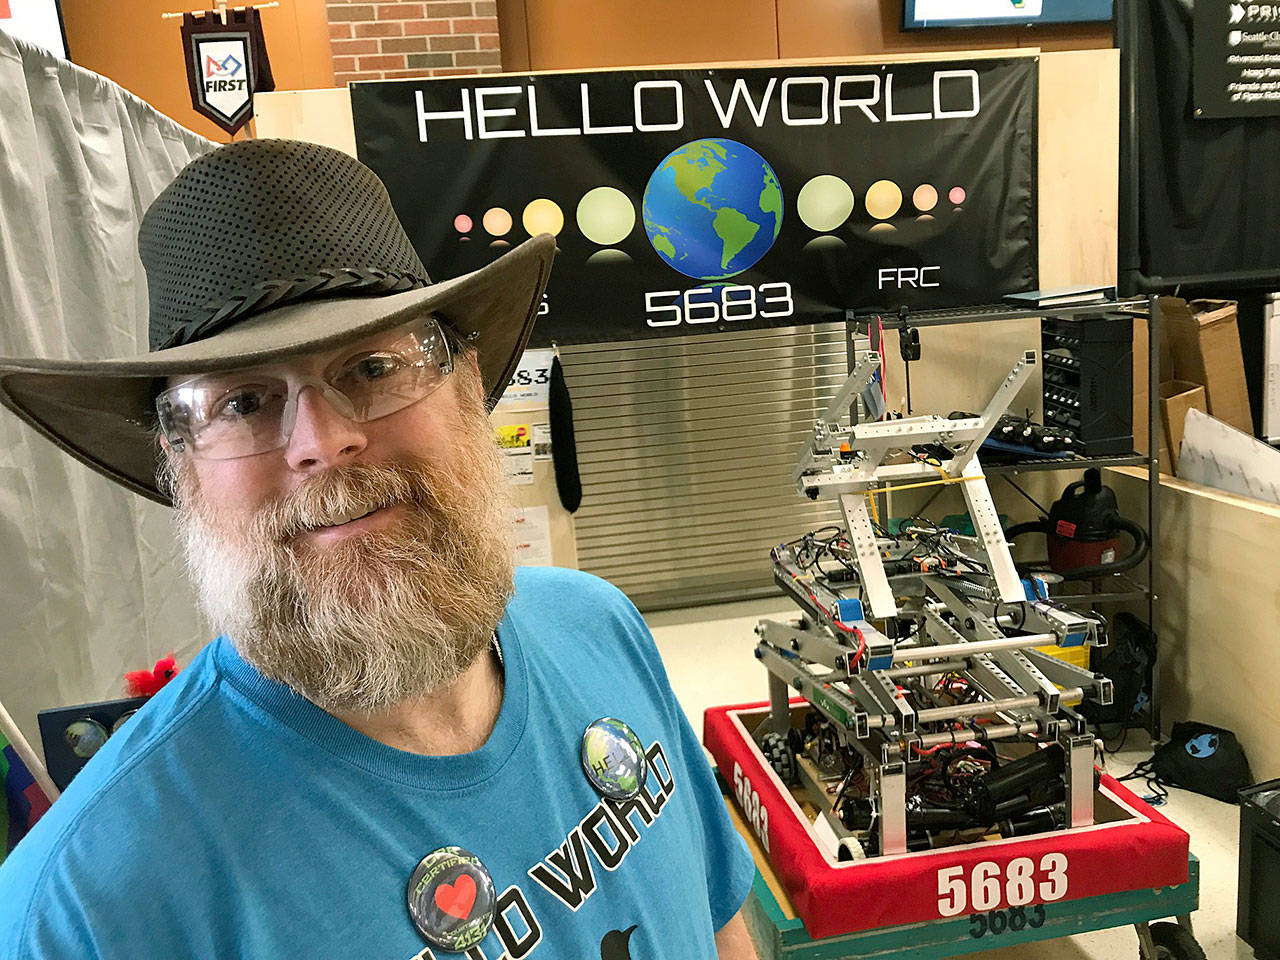 Kim Markham, a robot programmer at The Boeing Co., works part-time as coach and mentor of Auburn Riverside’s robotics team, which designed and engineered Hello World 5683. MARK KLAAS, Auburn Reporter